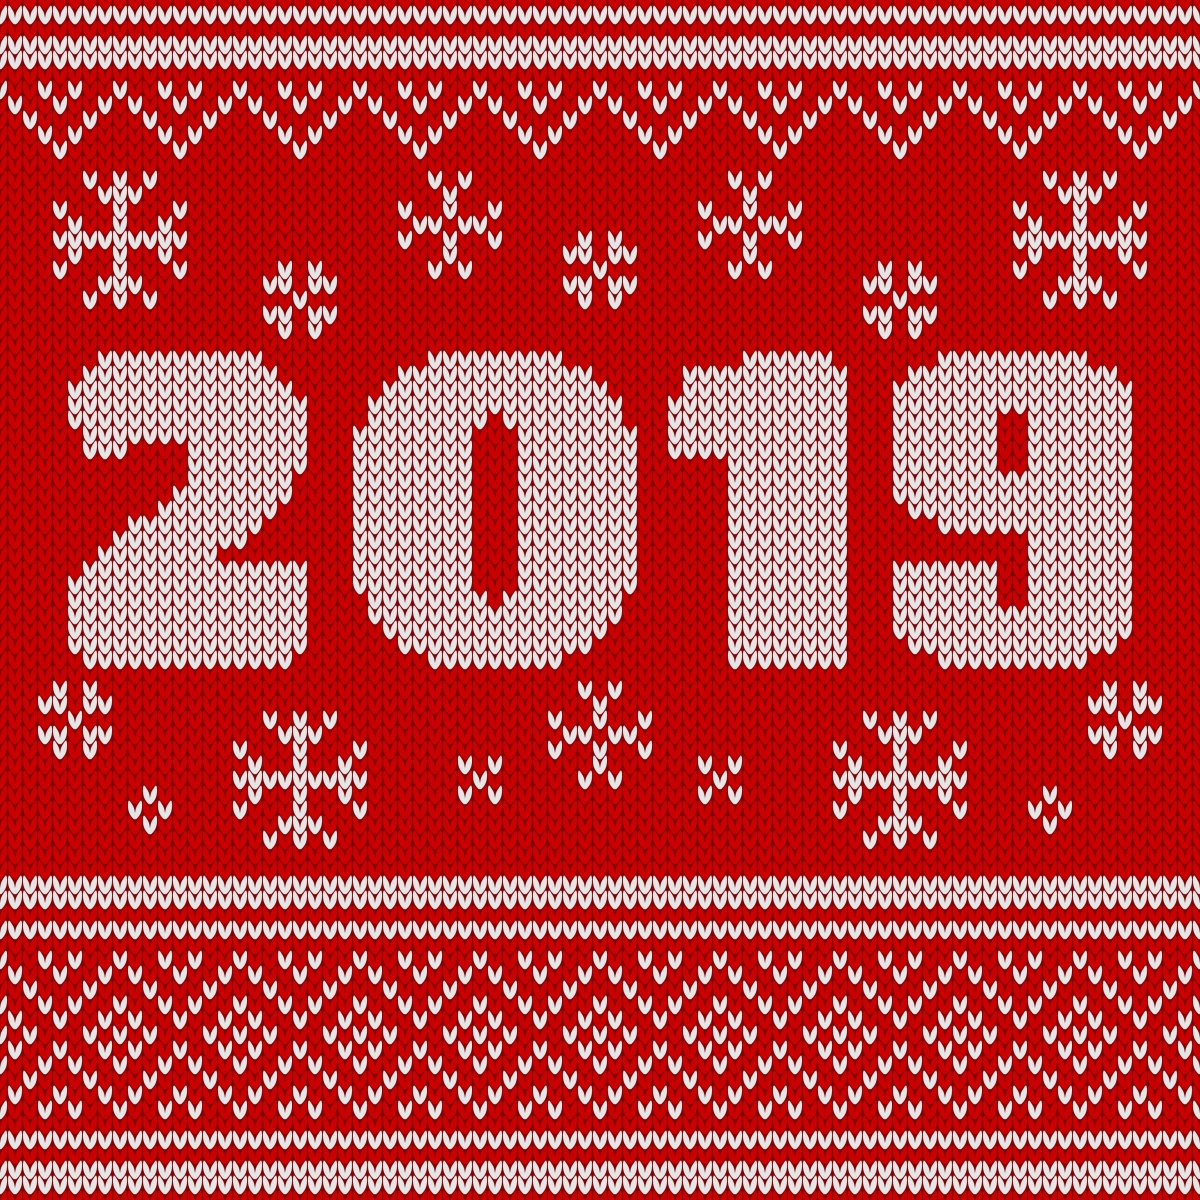 Seamless Knitting Patterns New Year Seamless Knitted Pattern With Number 2019 Knitting Sweater